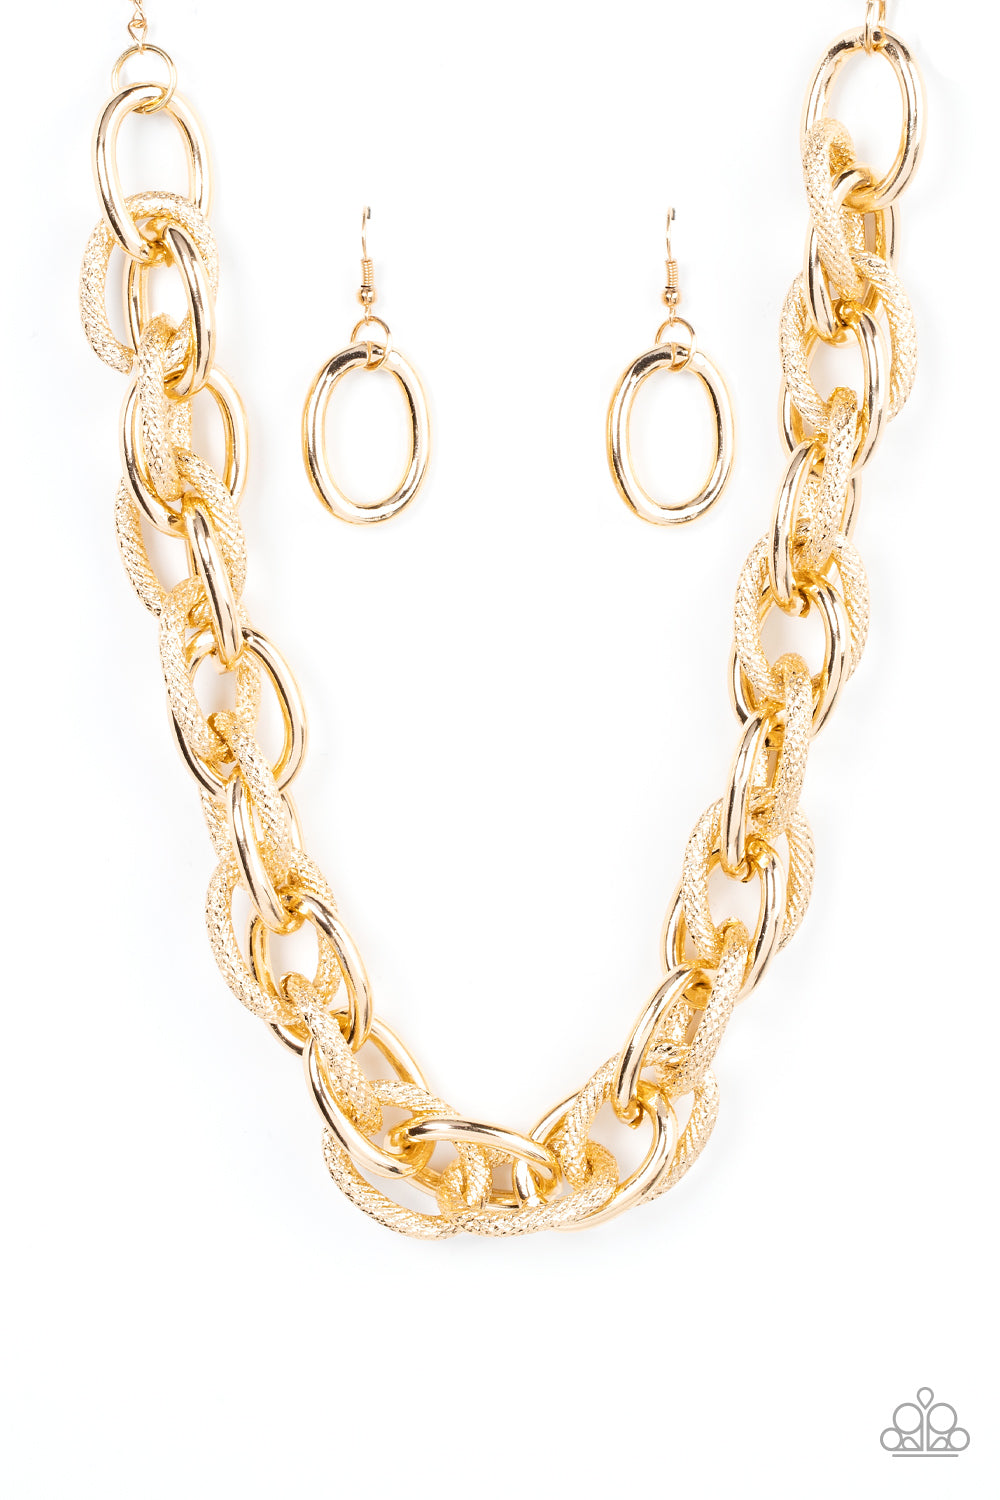 Gold Chain Buying Guide - ItsHot